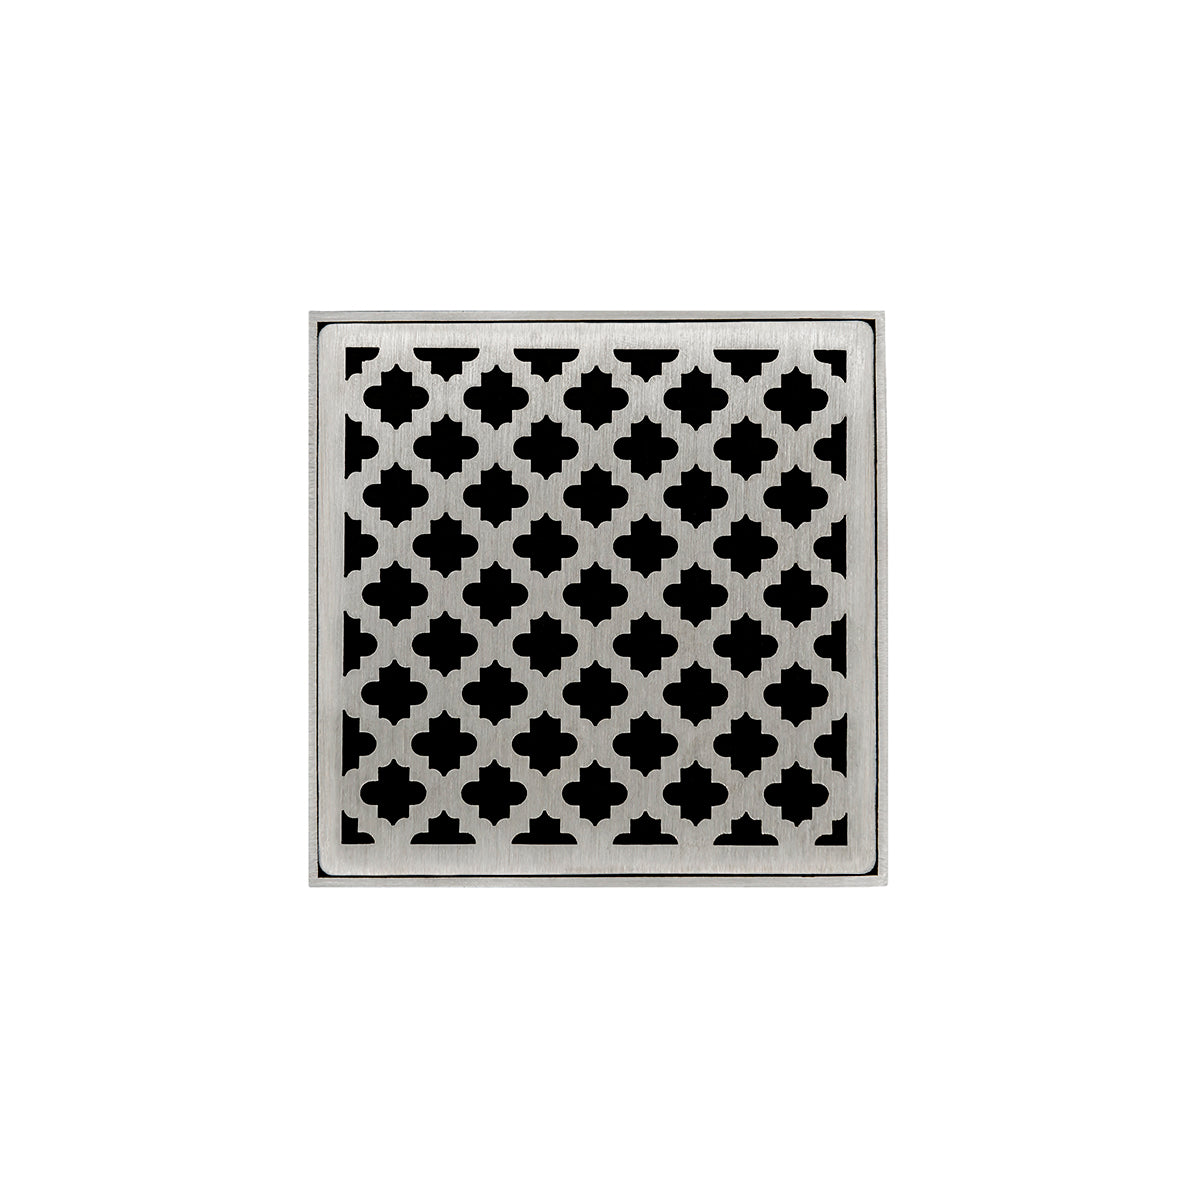 Infinity Drain 5" x 5" MDB 5 Premium Center Drain Kit with Moor Pattern Decorative Plate with PVC Bonded Flange Drain Body, 2", 3" and 4" Outlet